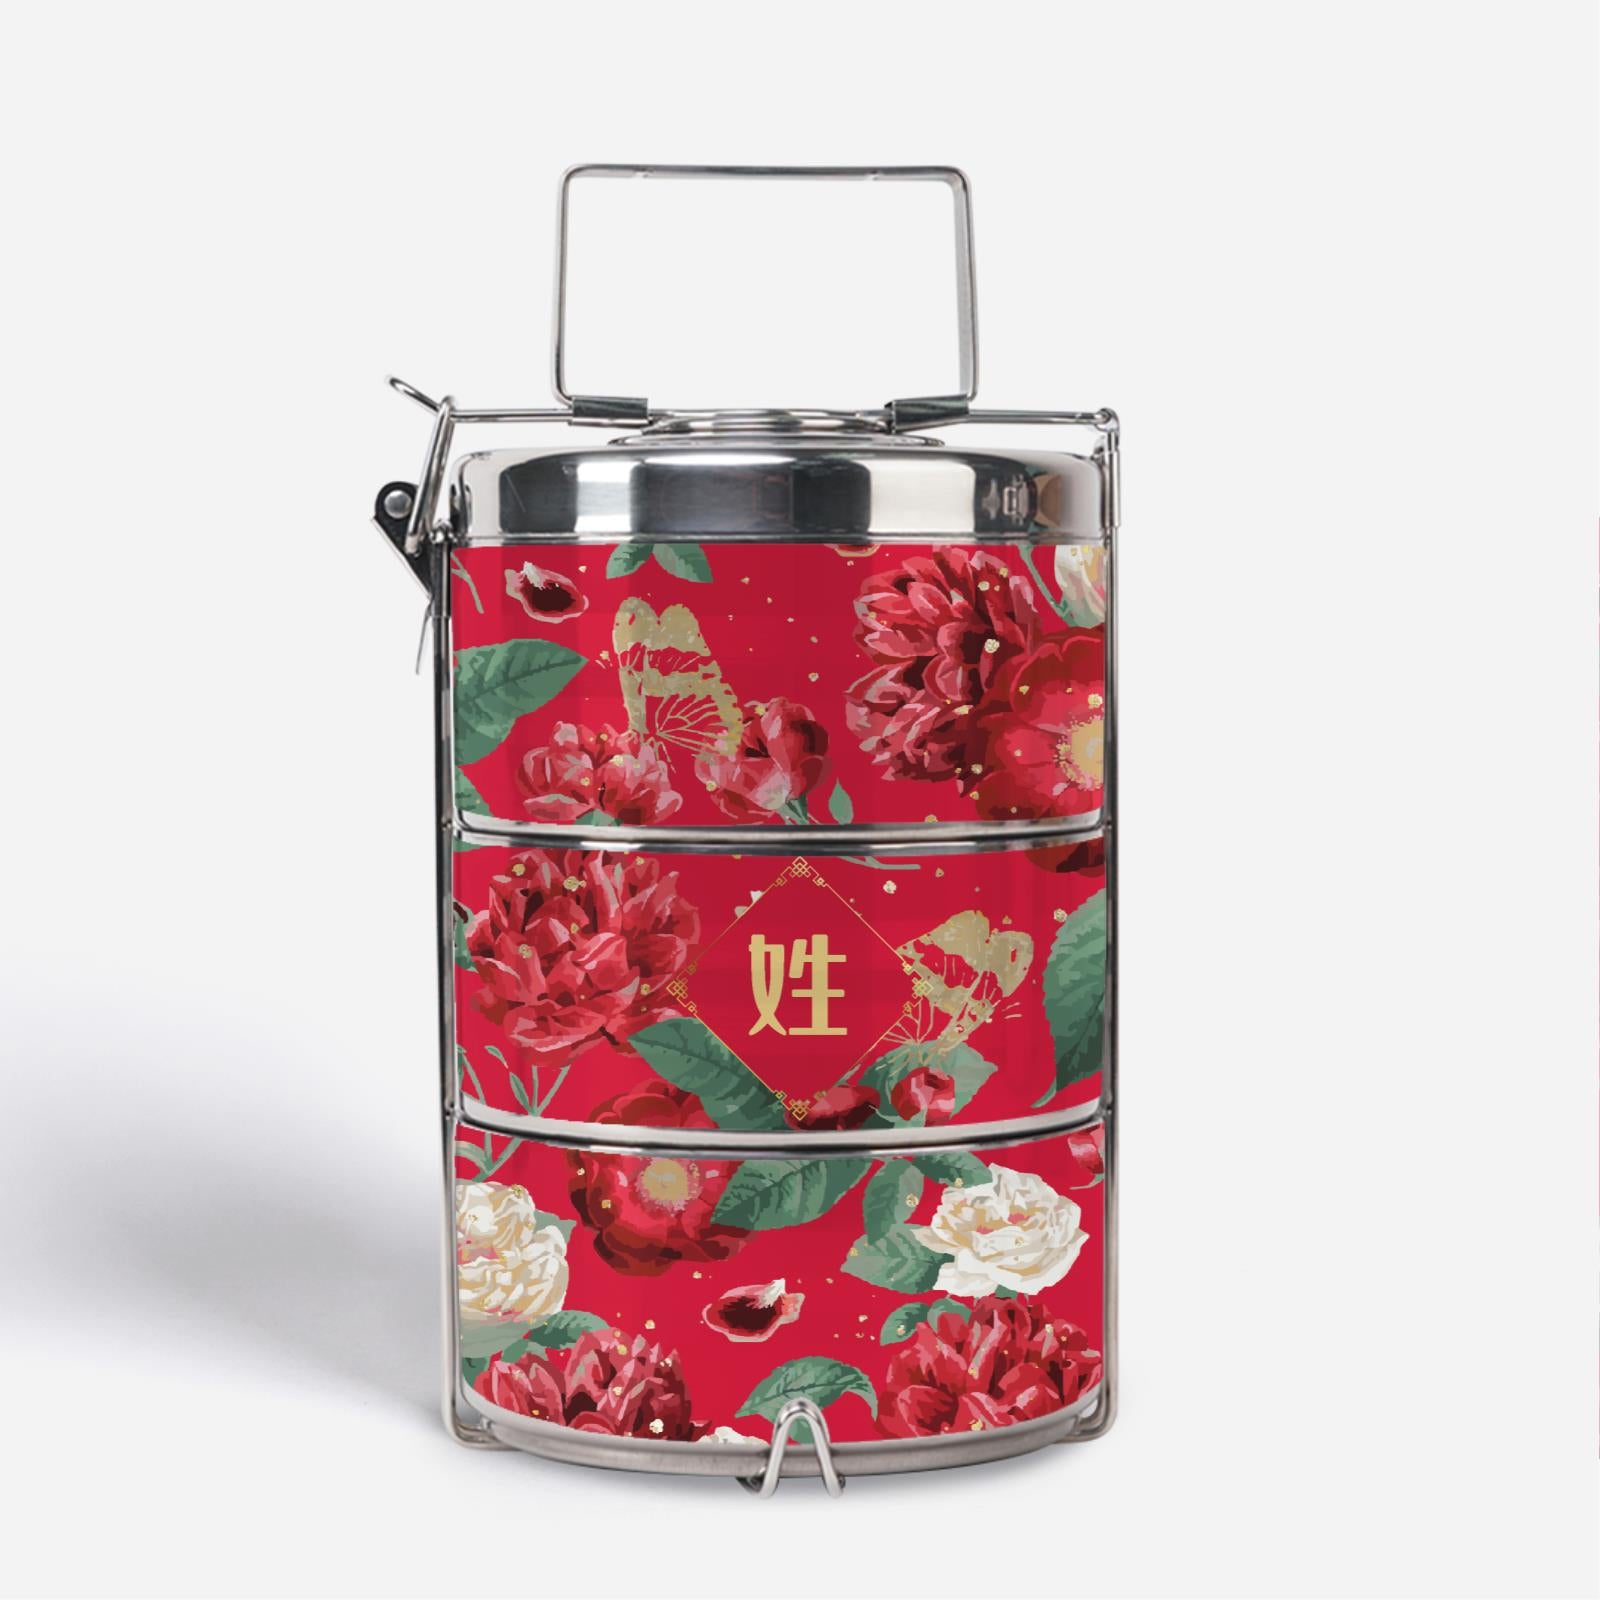 Royal Floral Series With Chinese Surname Premium Tiffin Carrier - Scorching Passion